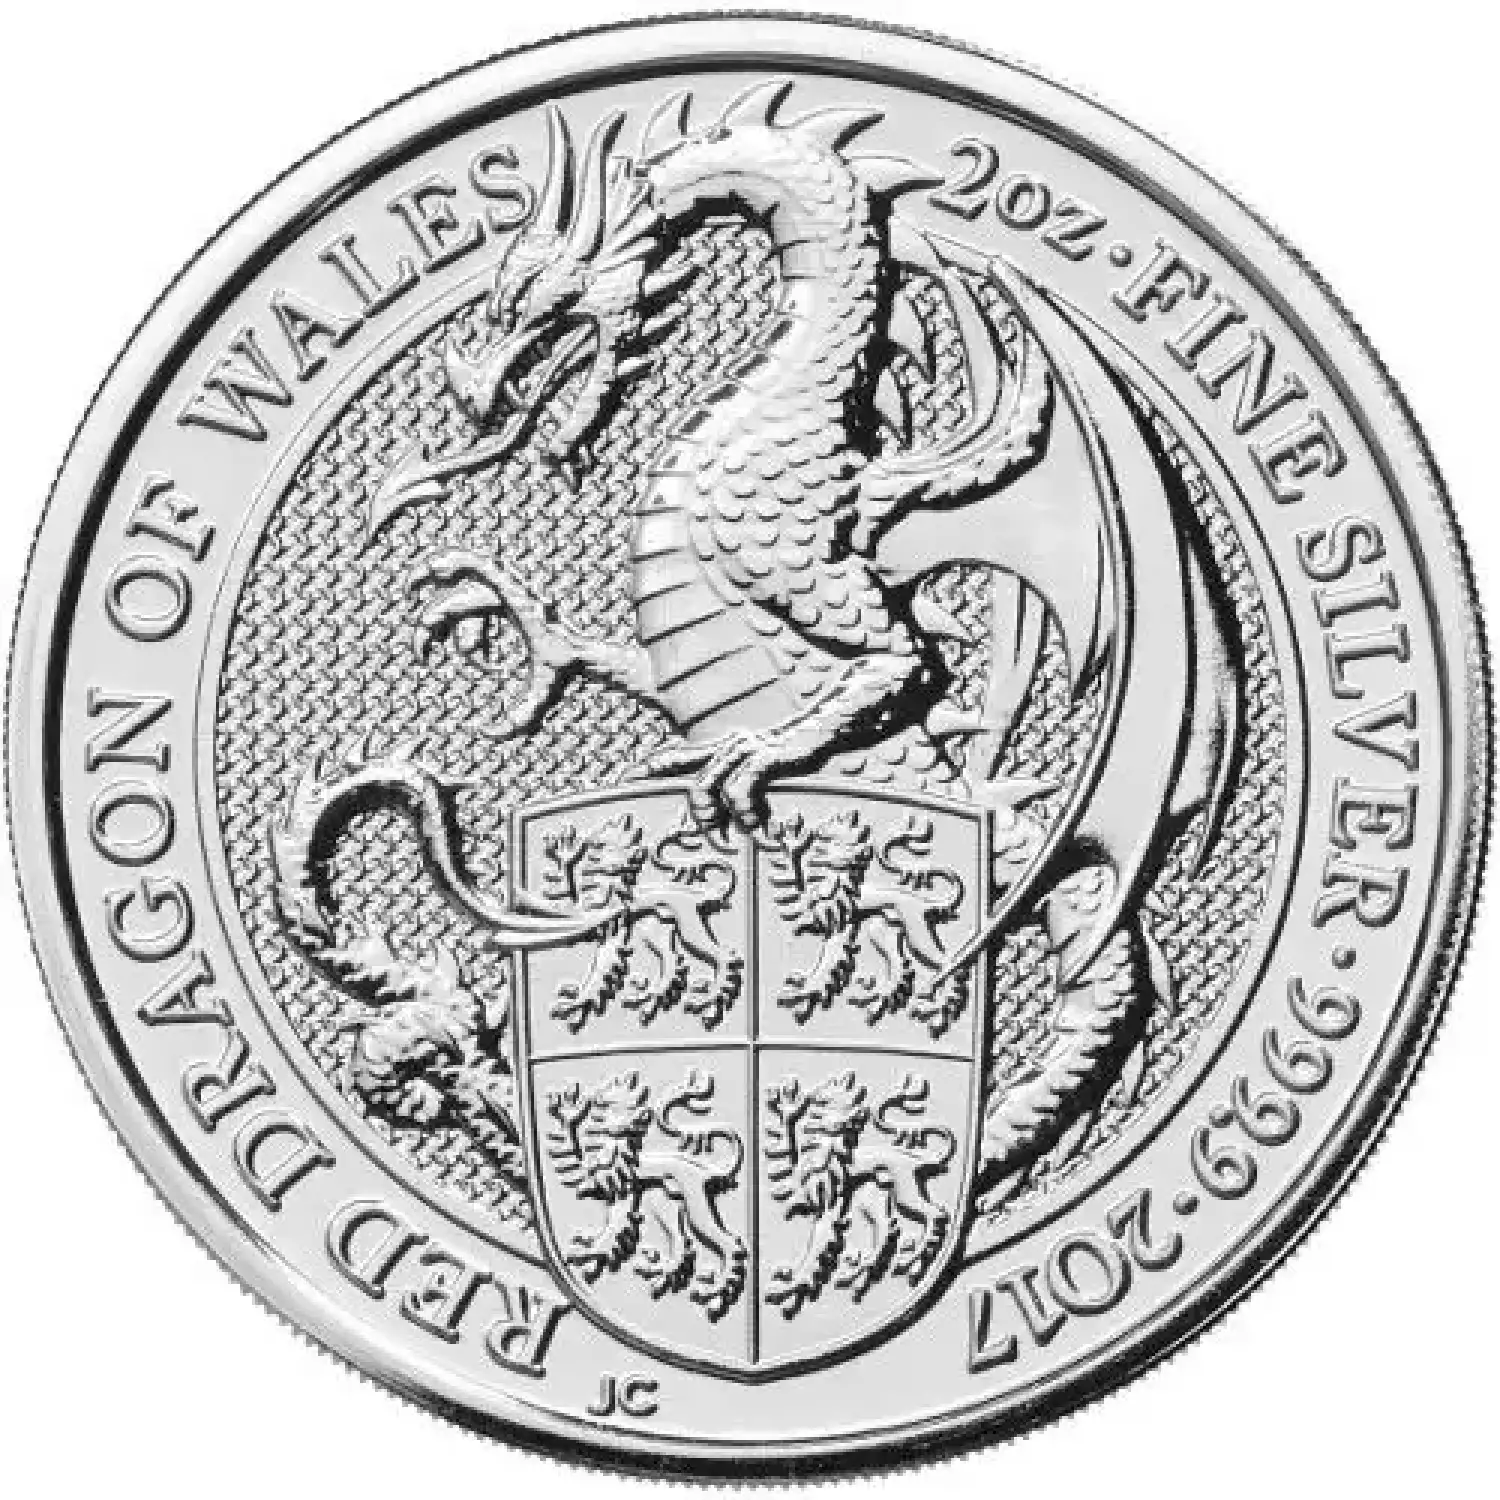 2017 2 oz British Silver Queen’s Beast Red Dragon Coin